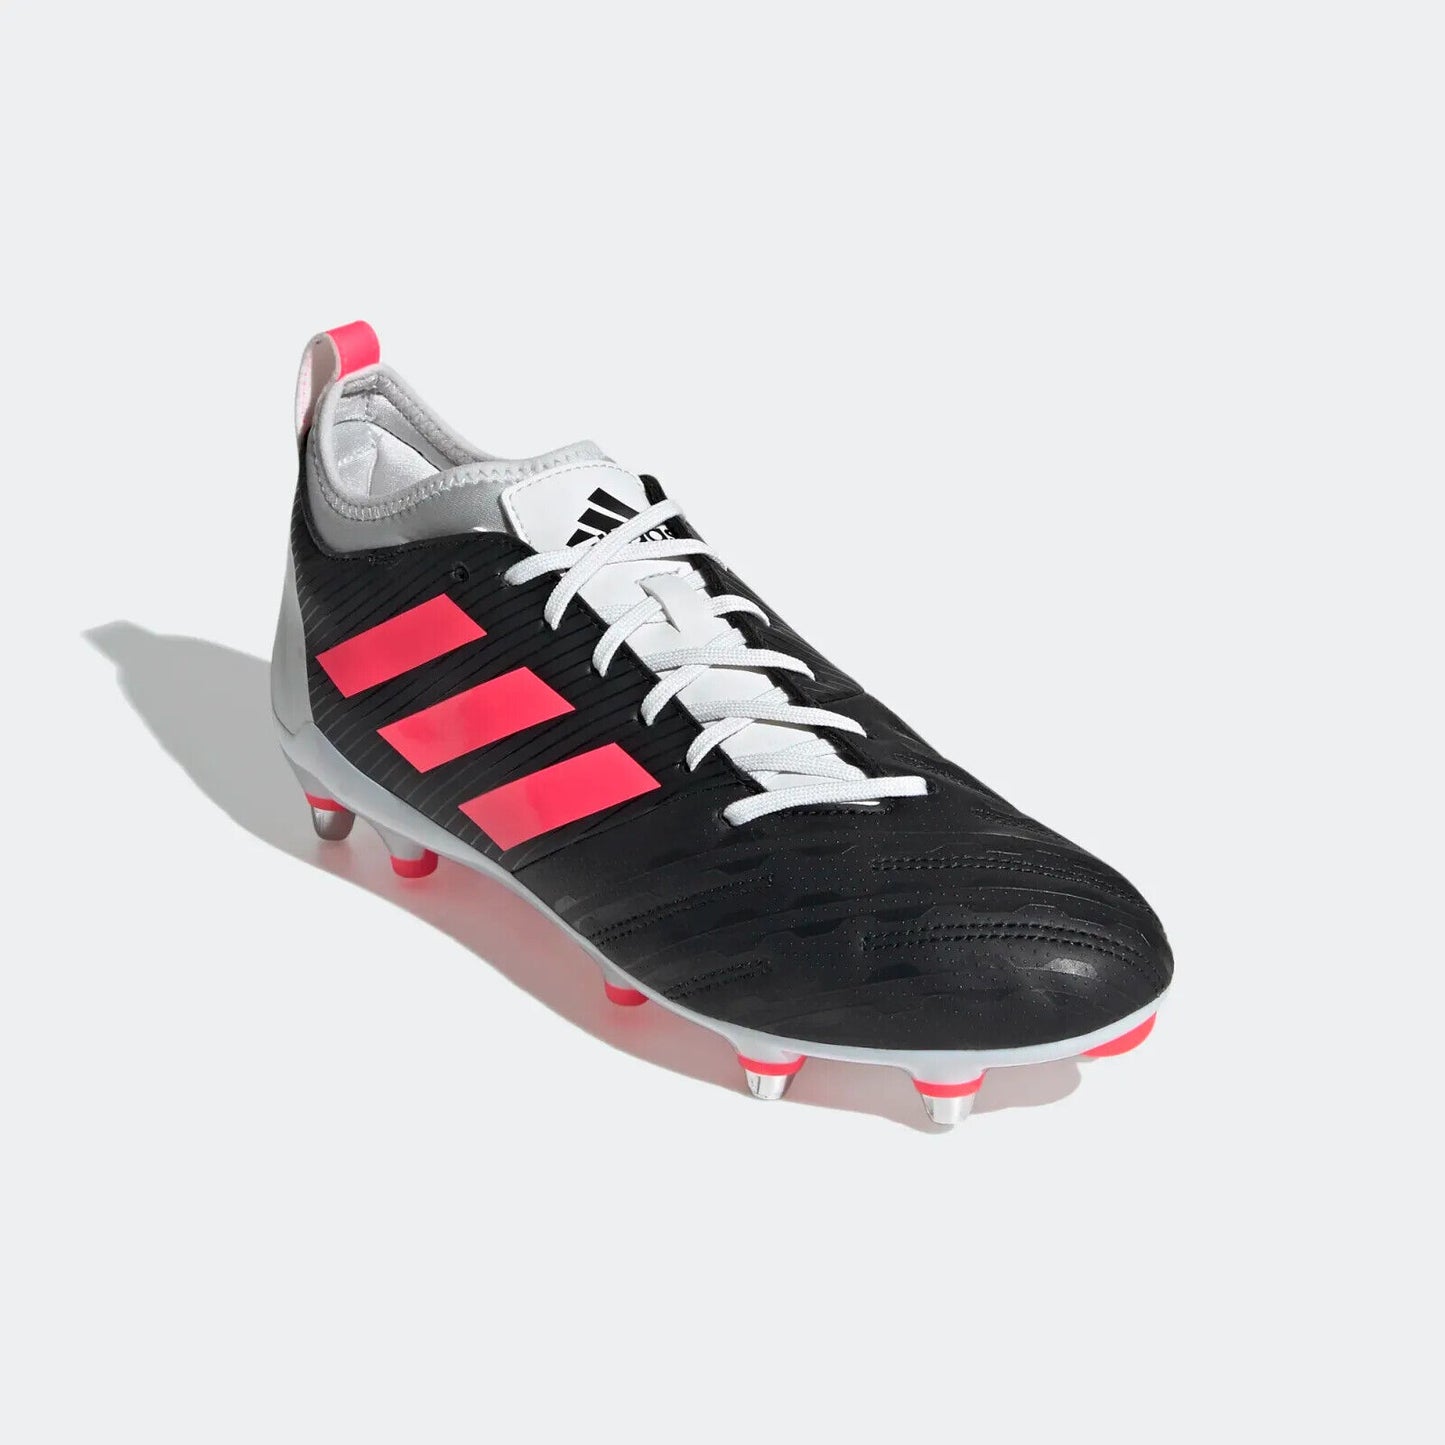 adidas Malice Elite SG Mens Rugby Boots - Black